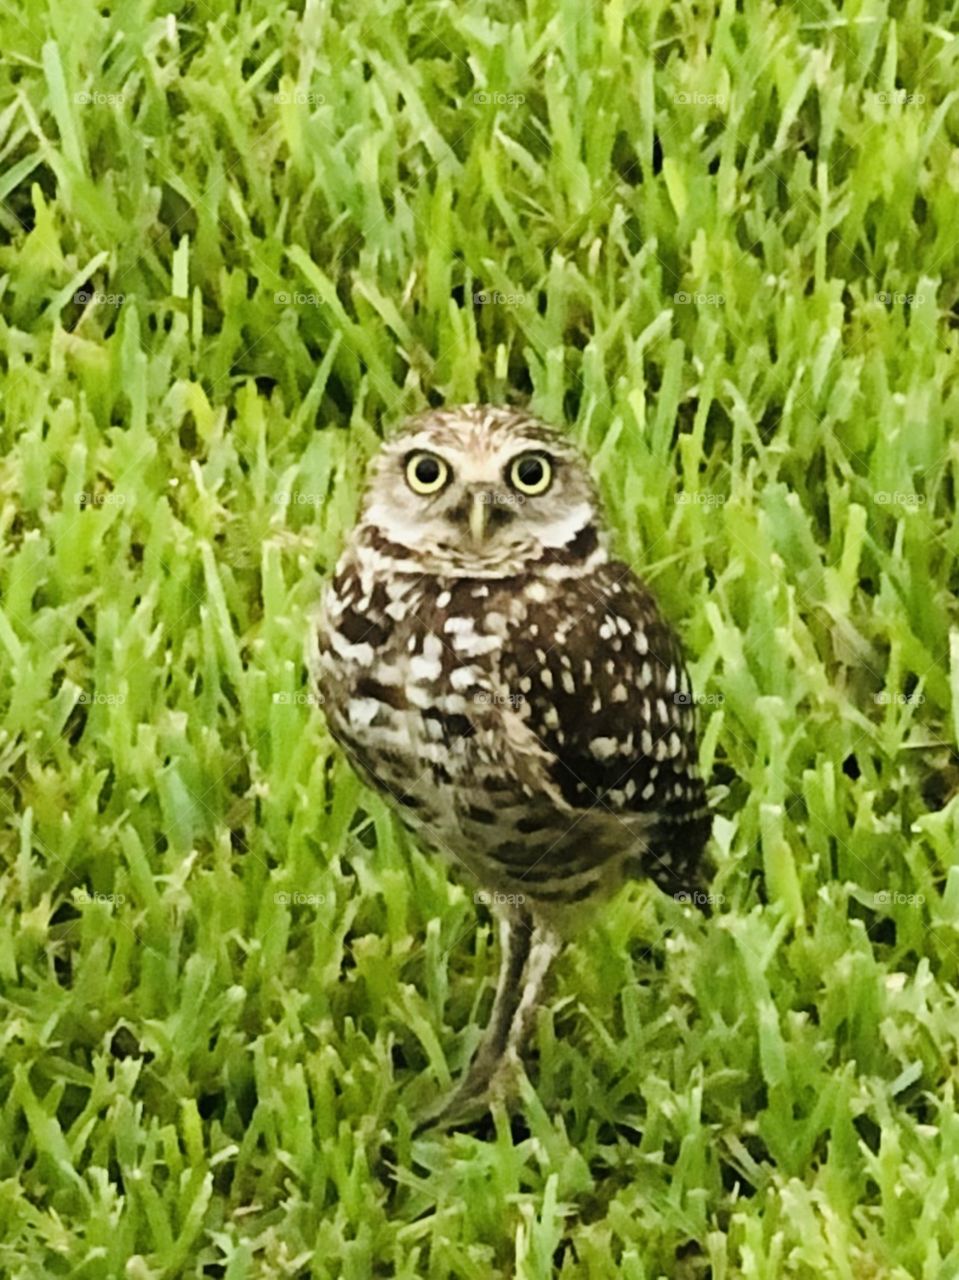 A burrowing owl keeps a watchful eye on his yard in Cape Coral, Florida.